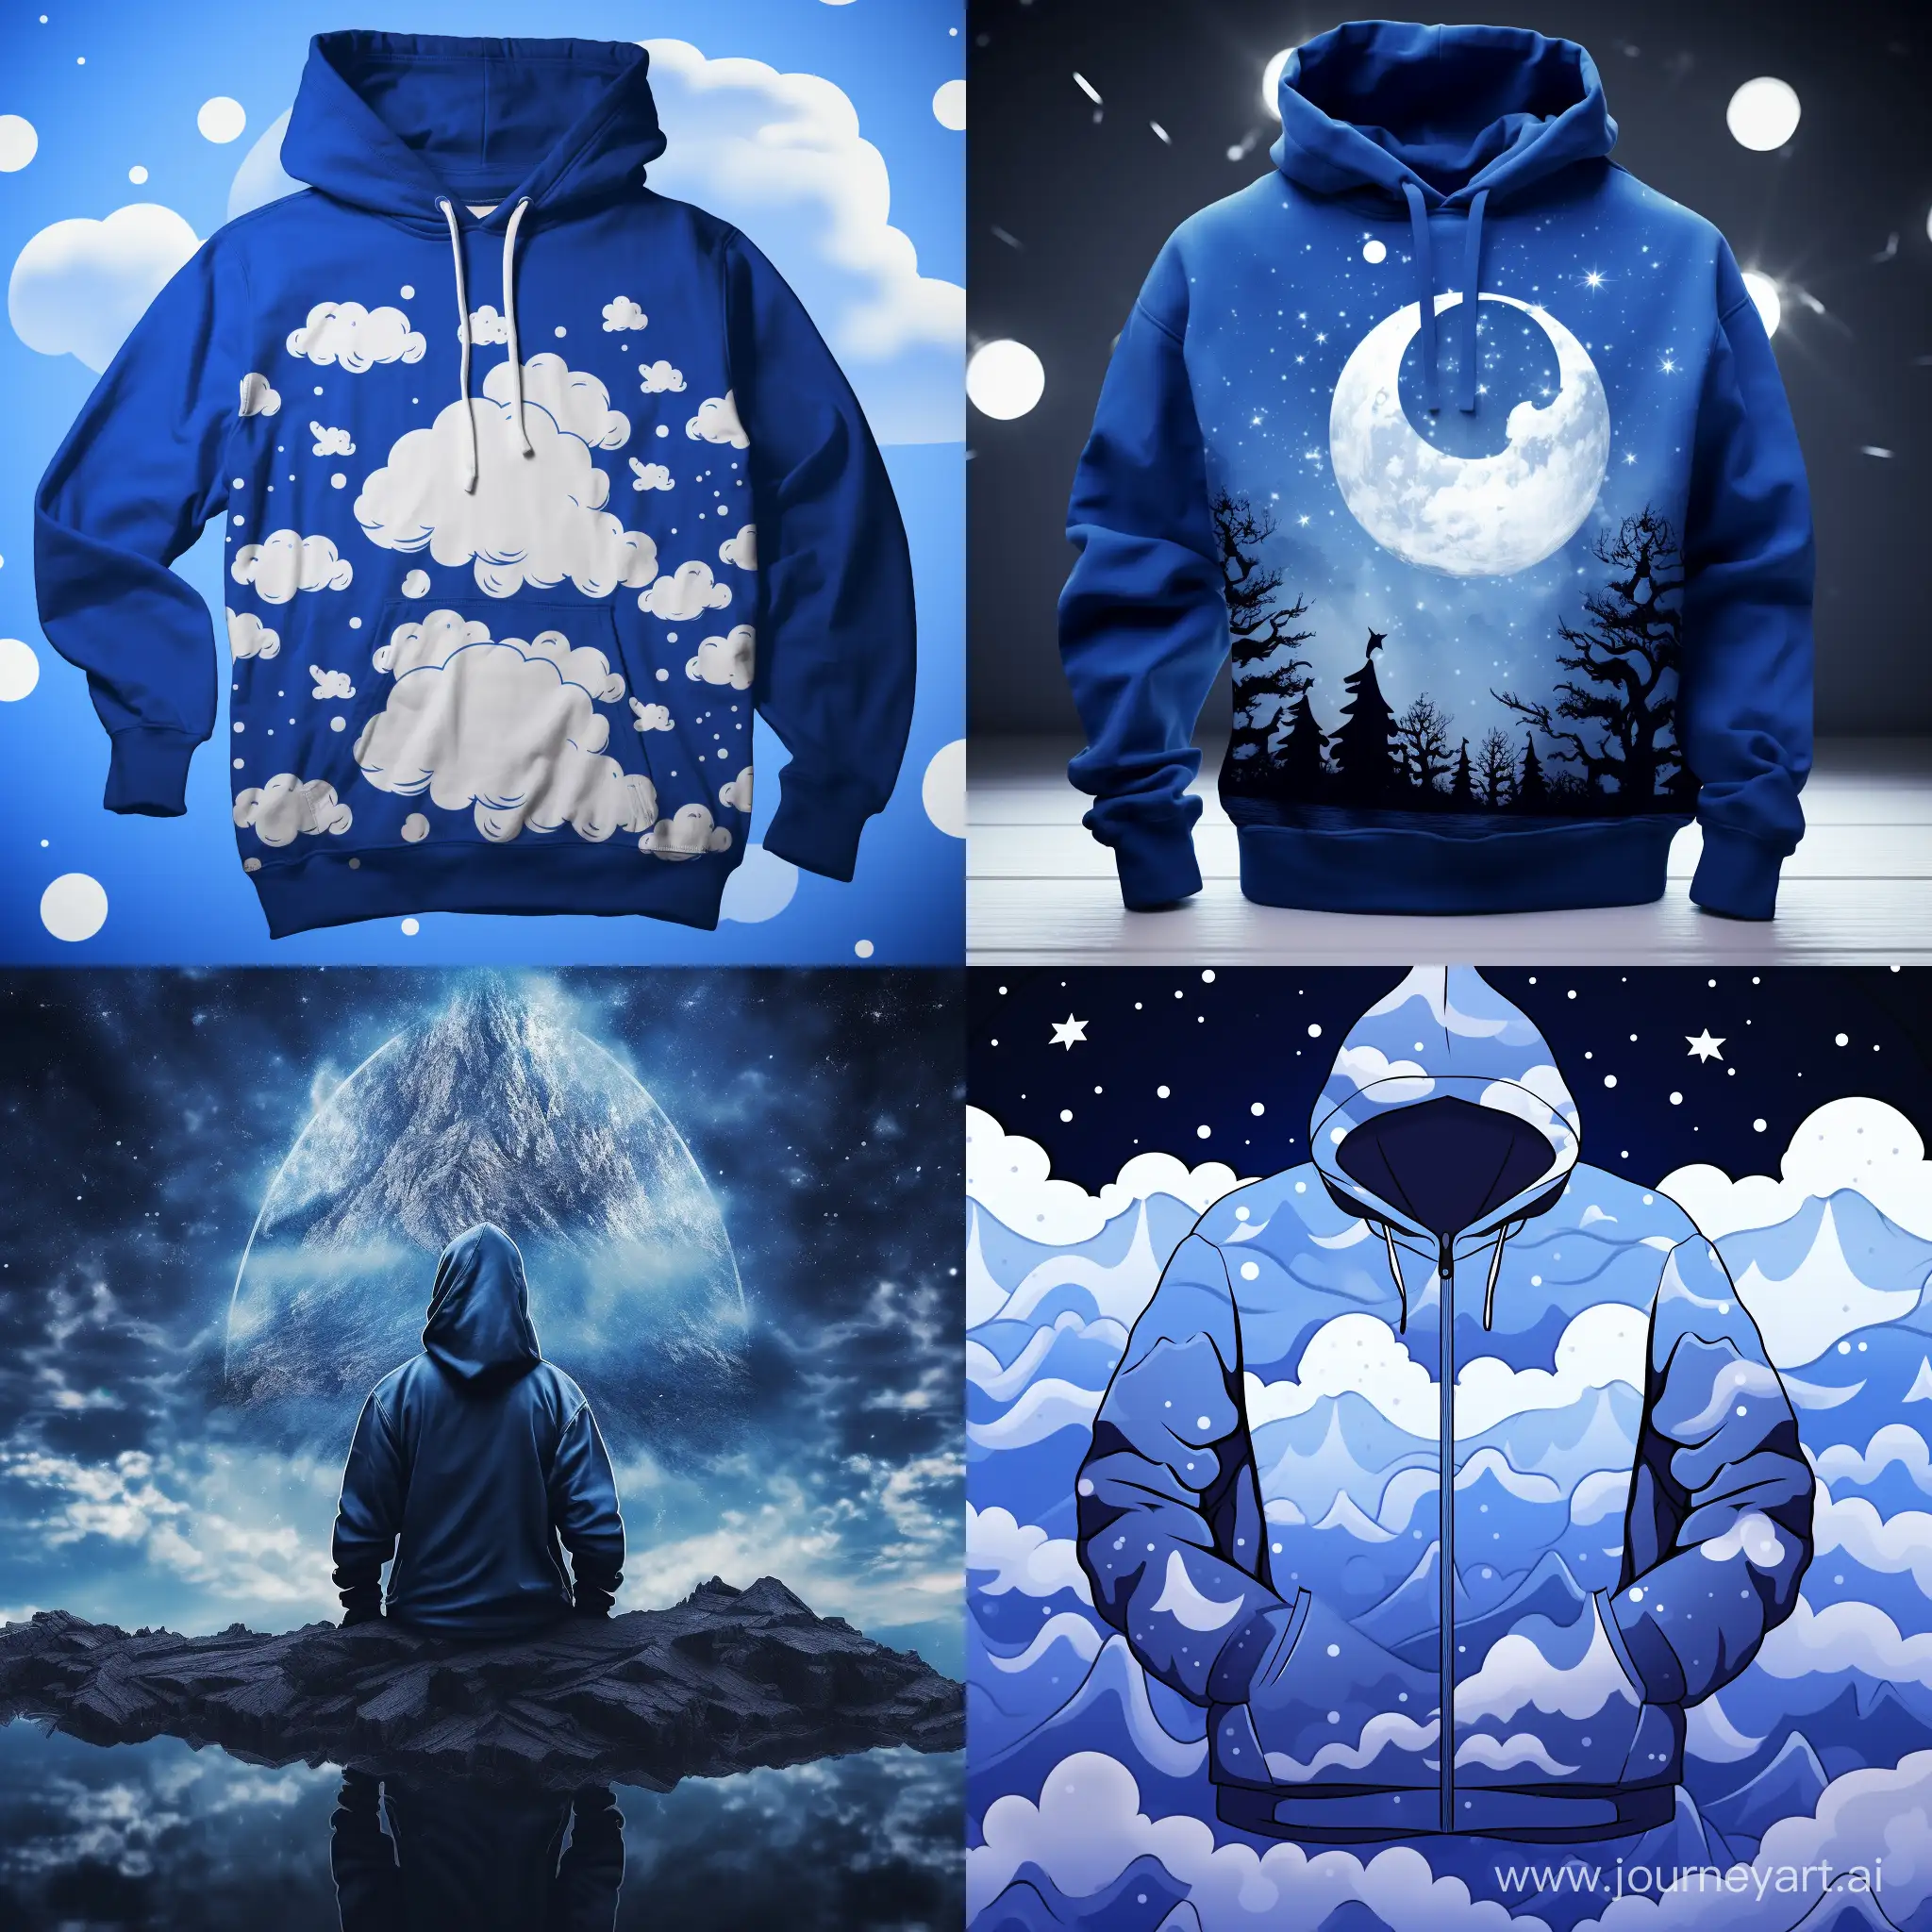 Starry-Night-Hoodies-Blue-and-White-Apparel-for-Cosmic-Style